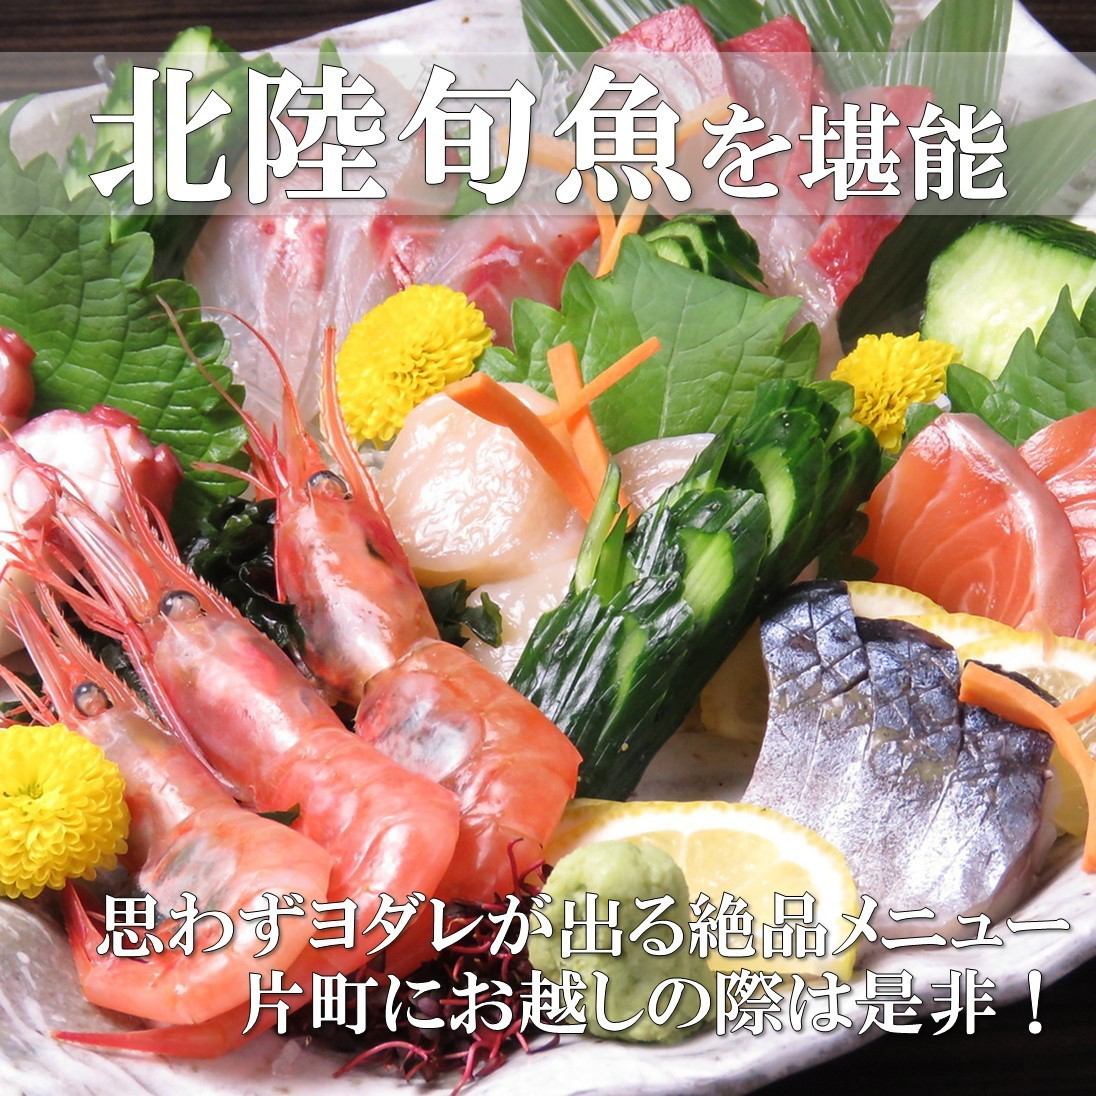 The best value for money ◎ Izakaya where you can go every day with a wide variety of products ◎